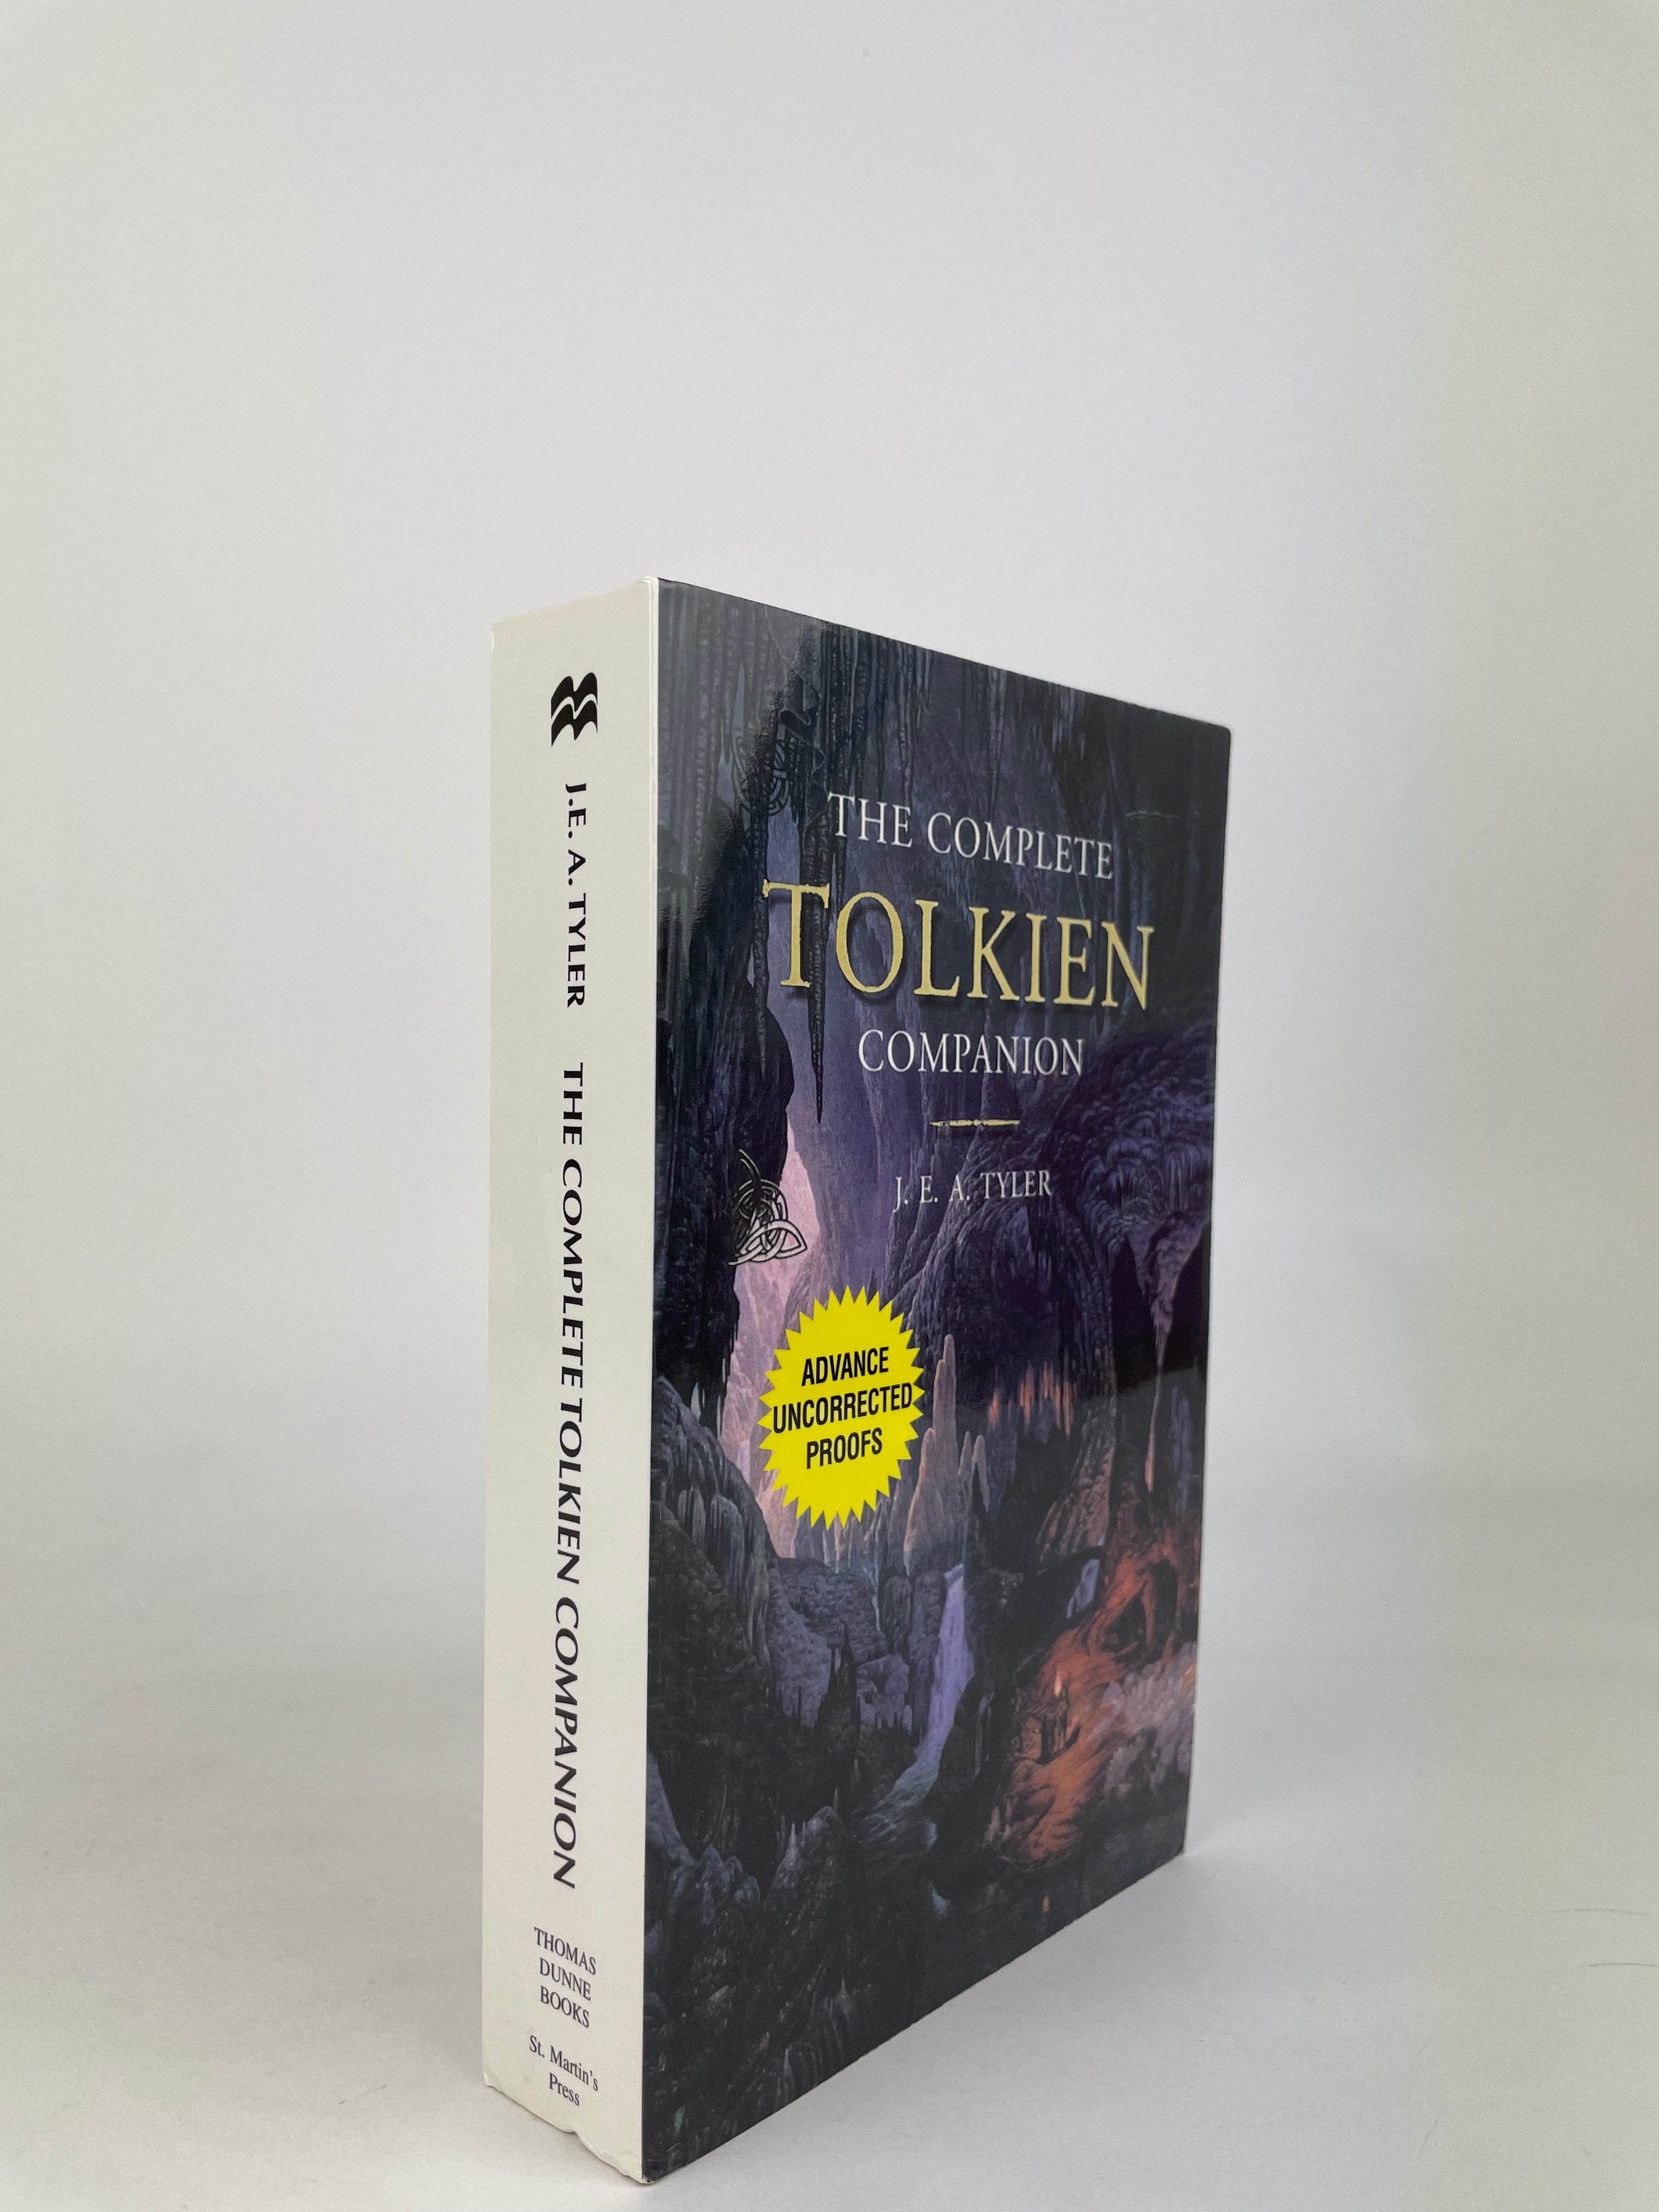 The Complete Tolkien Companion Advance Uncorrected Proof 2004 3